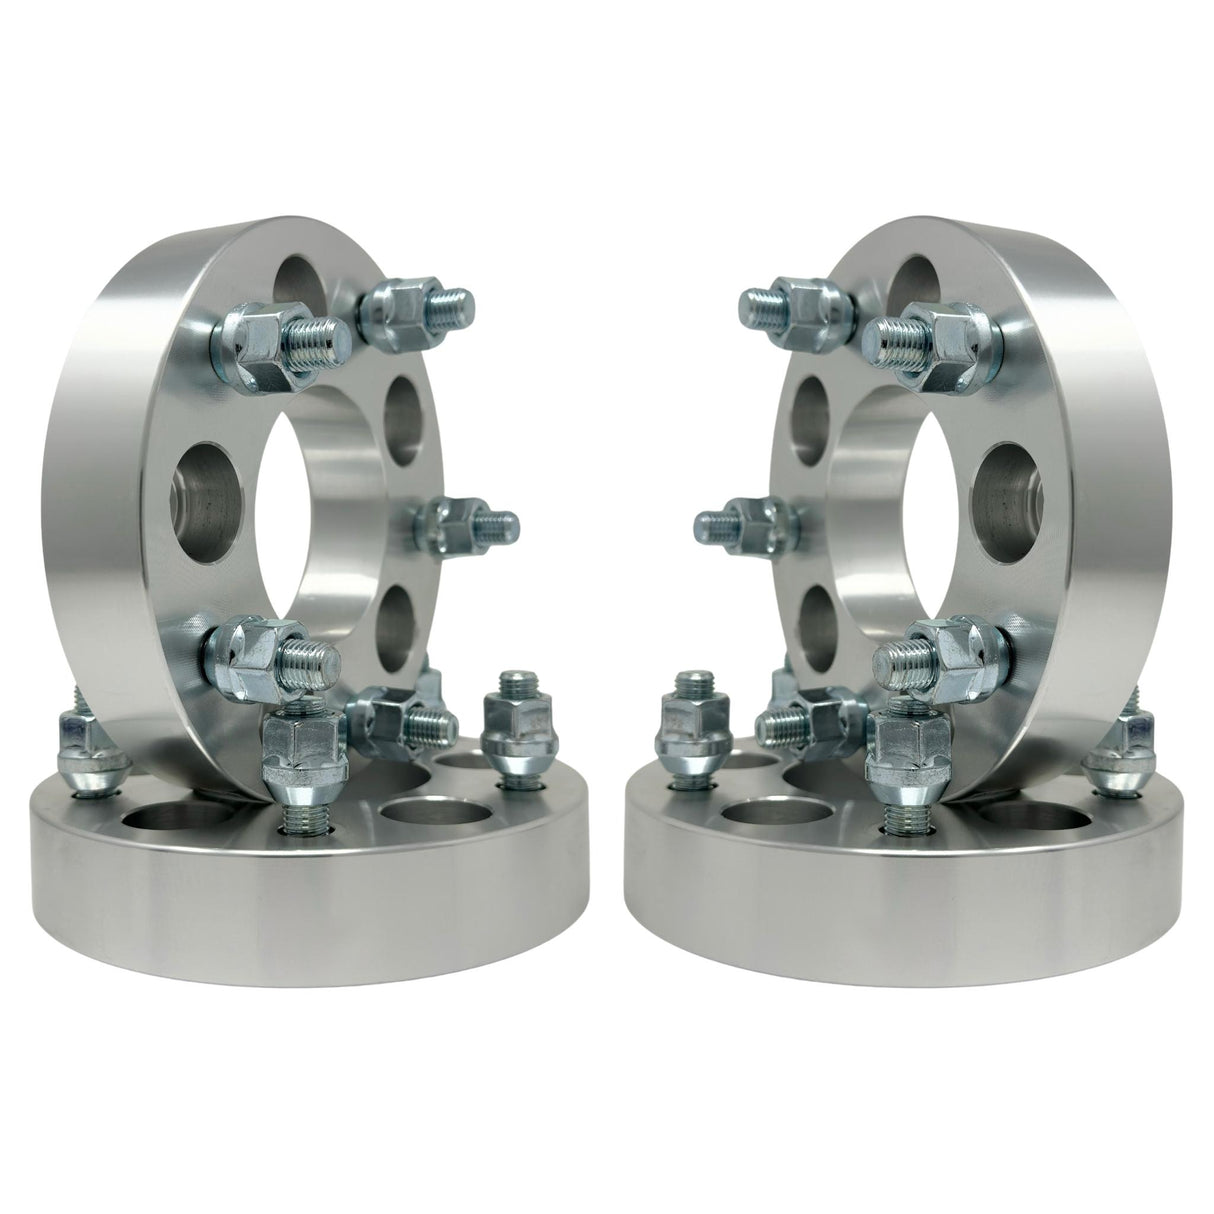 5x5 to 5x4.5 Wheel Adapters 1.25" Inch (32mm) 1/2-20 Studs & Lug Nuts 74mm Center Bore | 5x127 to 5x114.3